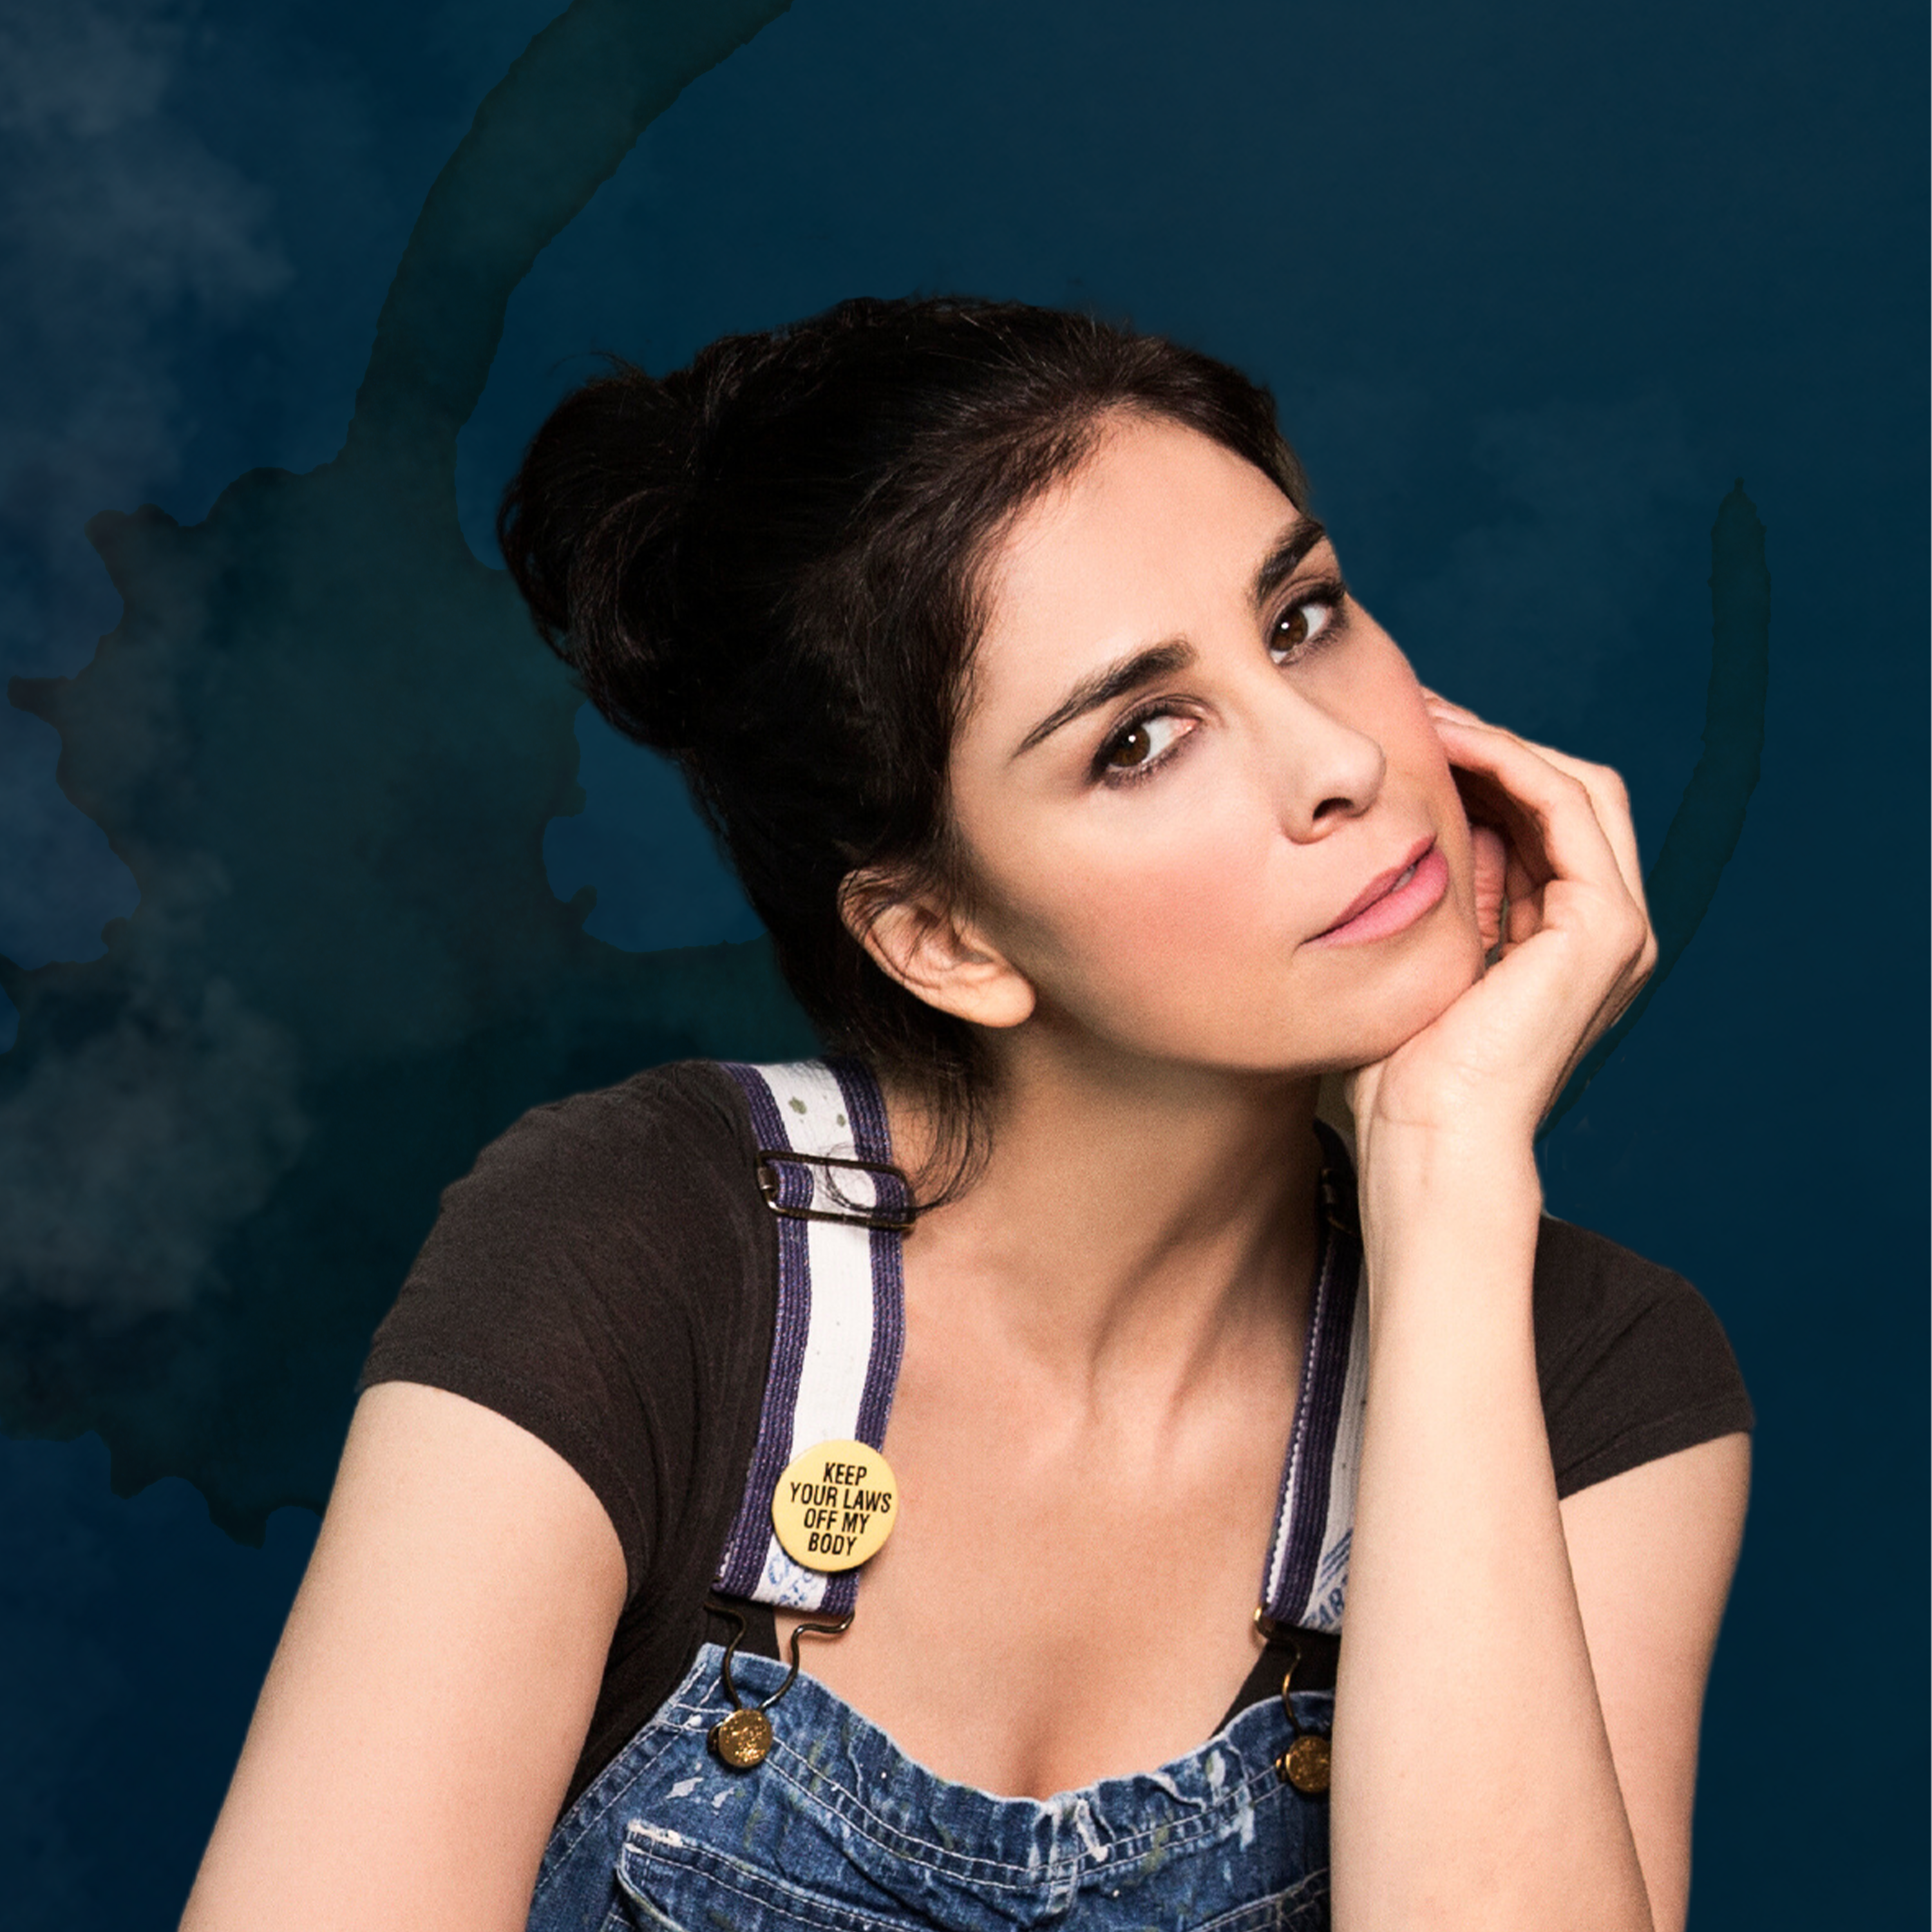 Sarah Silverman and the Stupid, Shitty Things You’ve Done